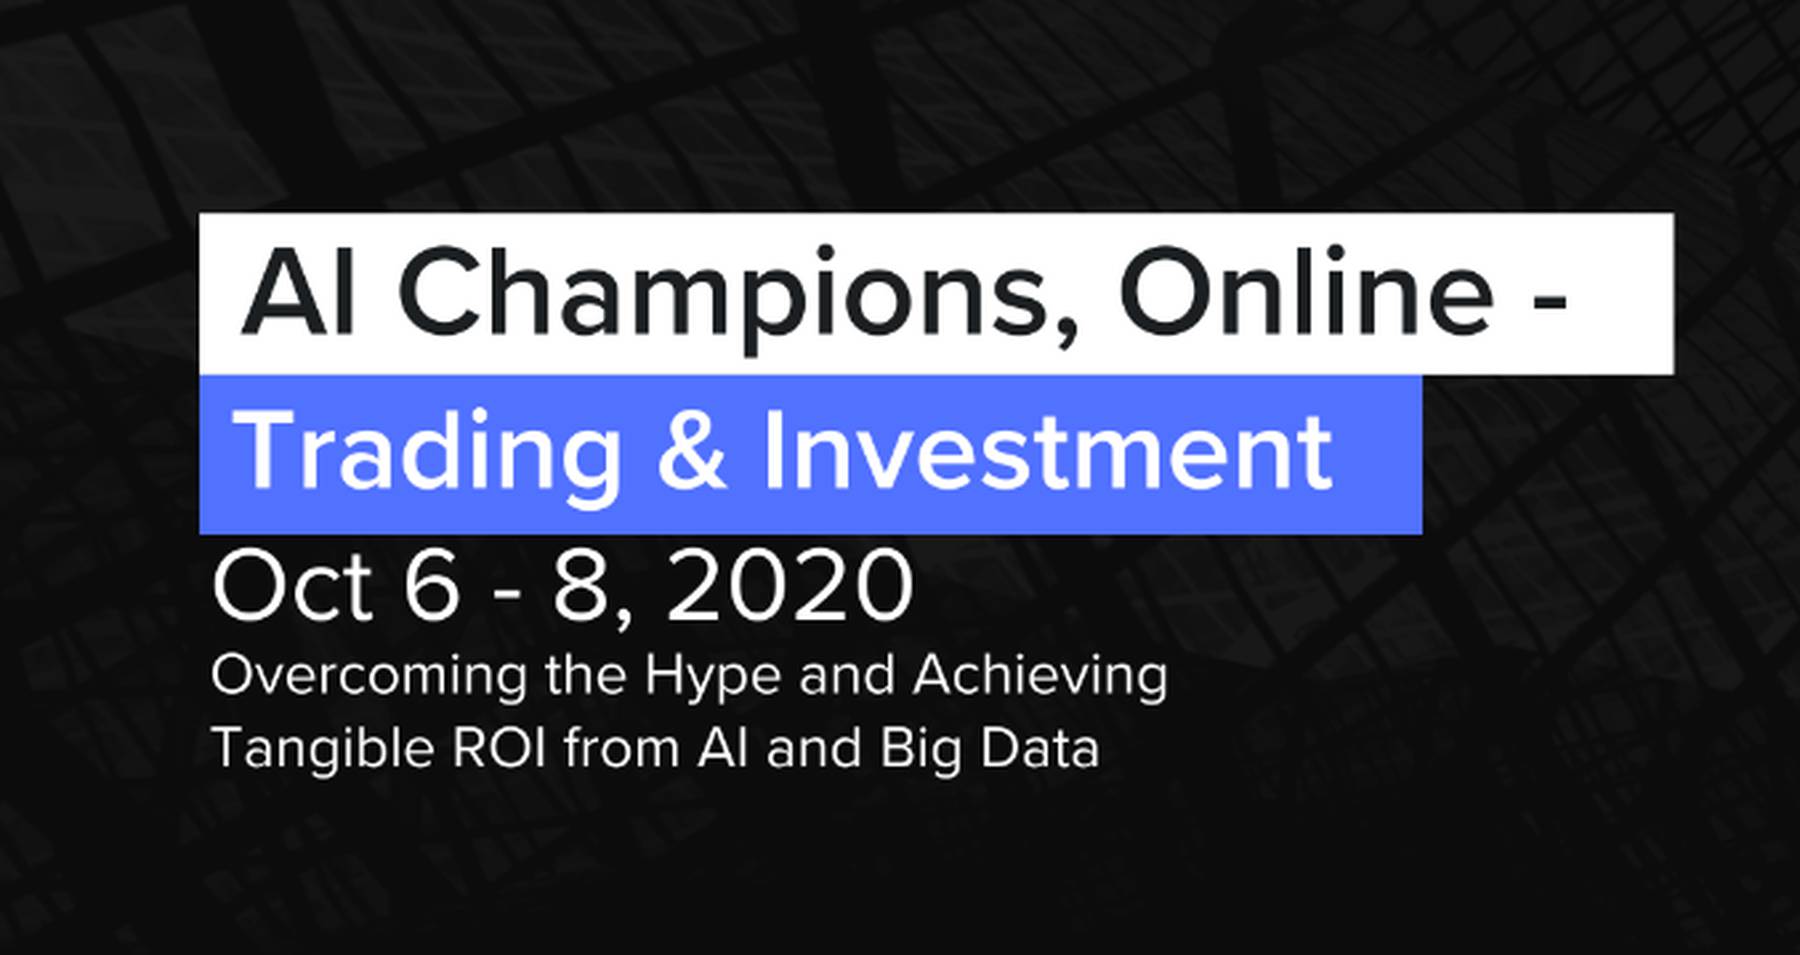 AI Champions - Trading & Investment 2020